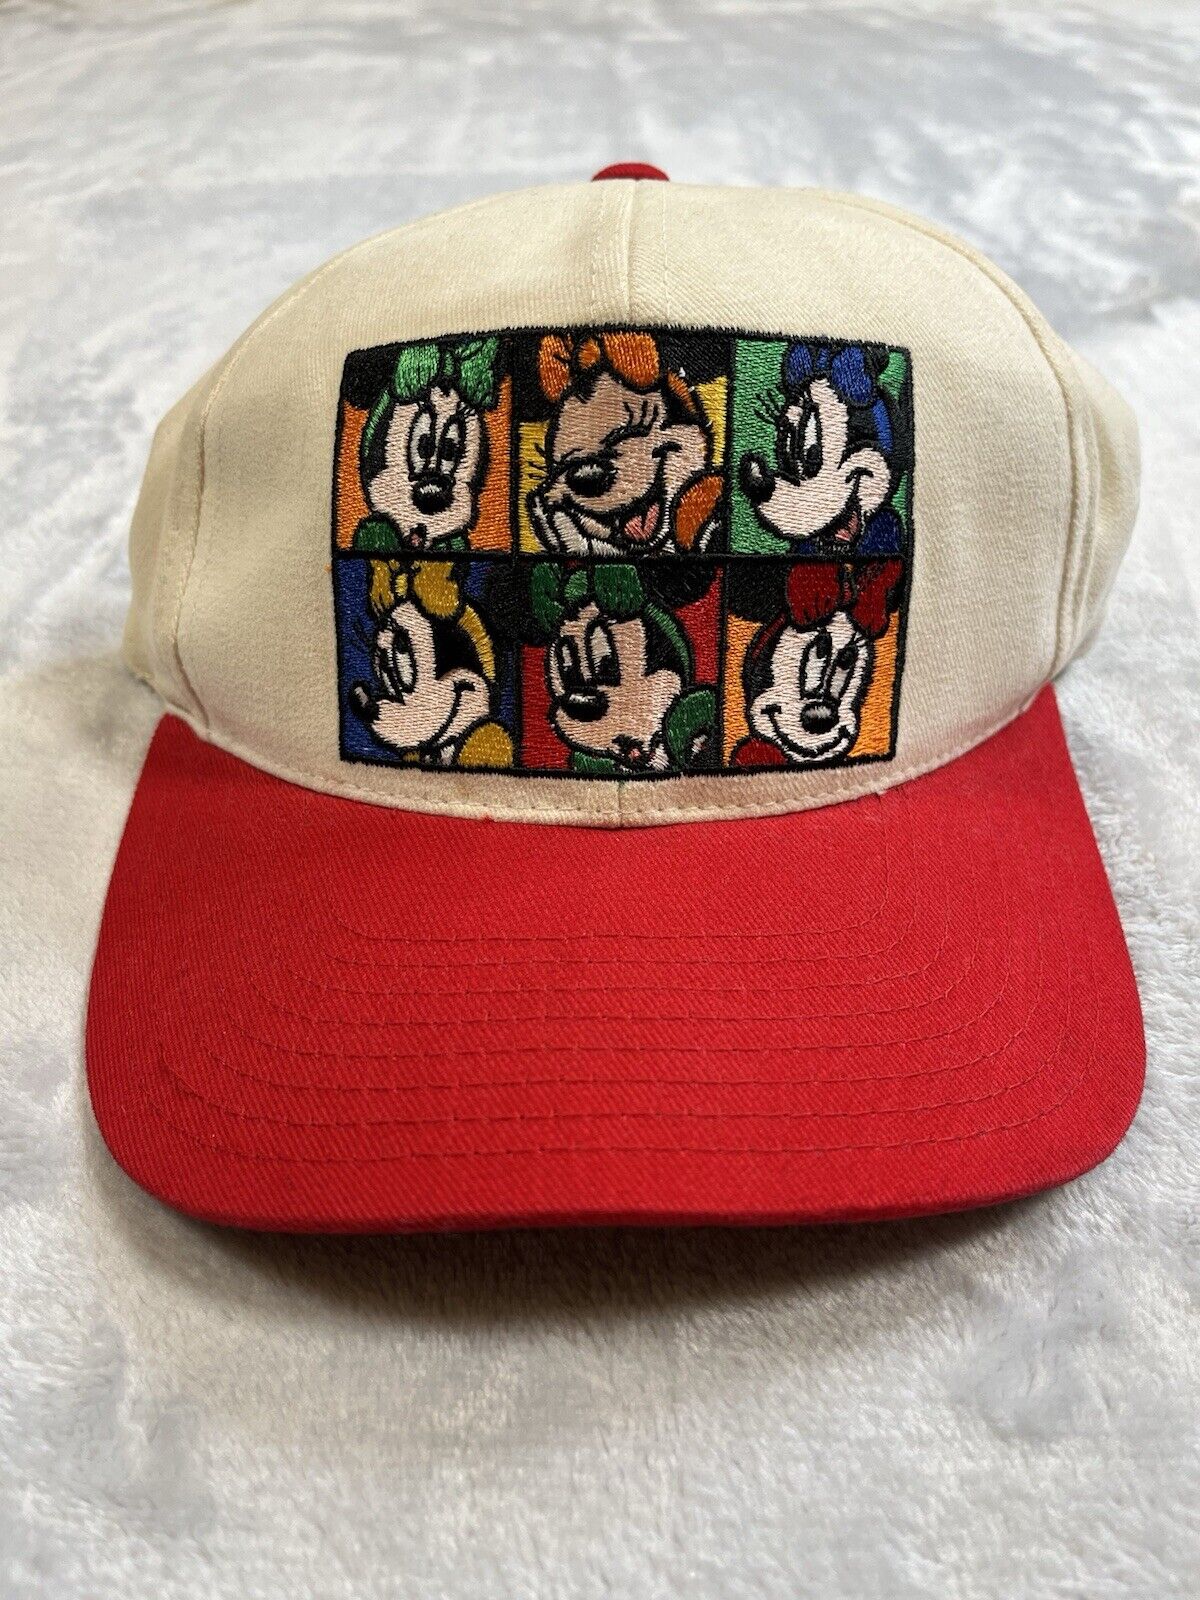 DISNEY Goofy’s Hat Co. Minnie Mouse Collage Emotions Vintage SnapBack Hat 90s